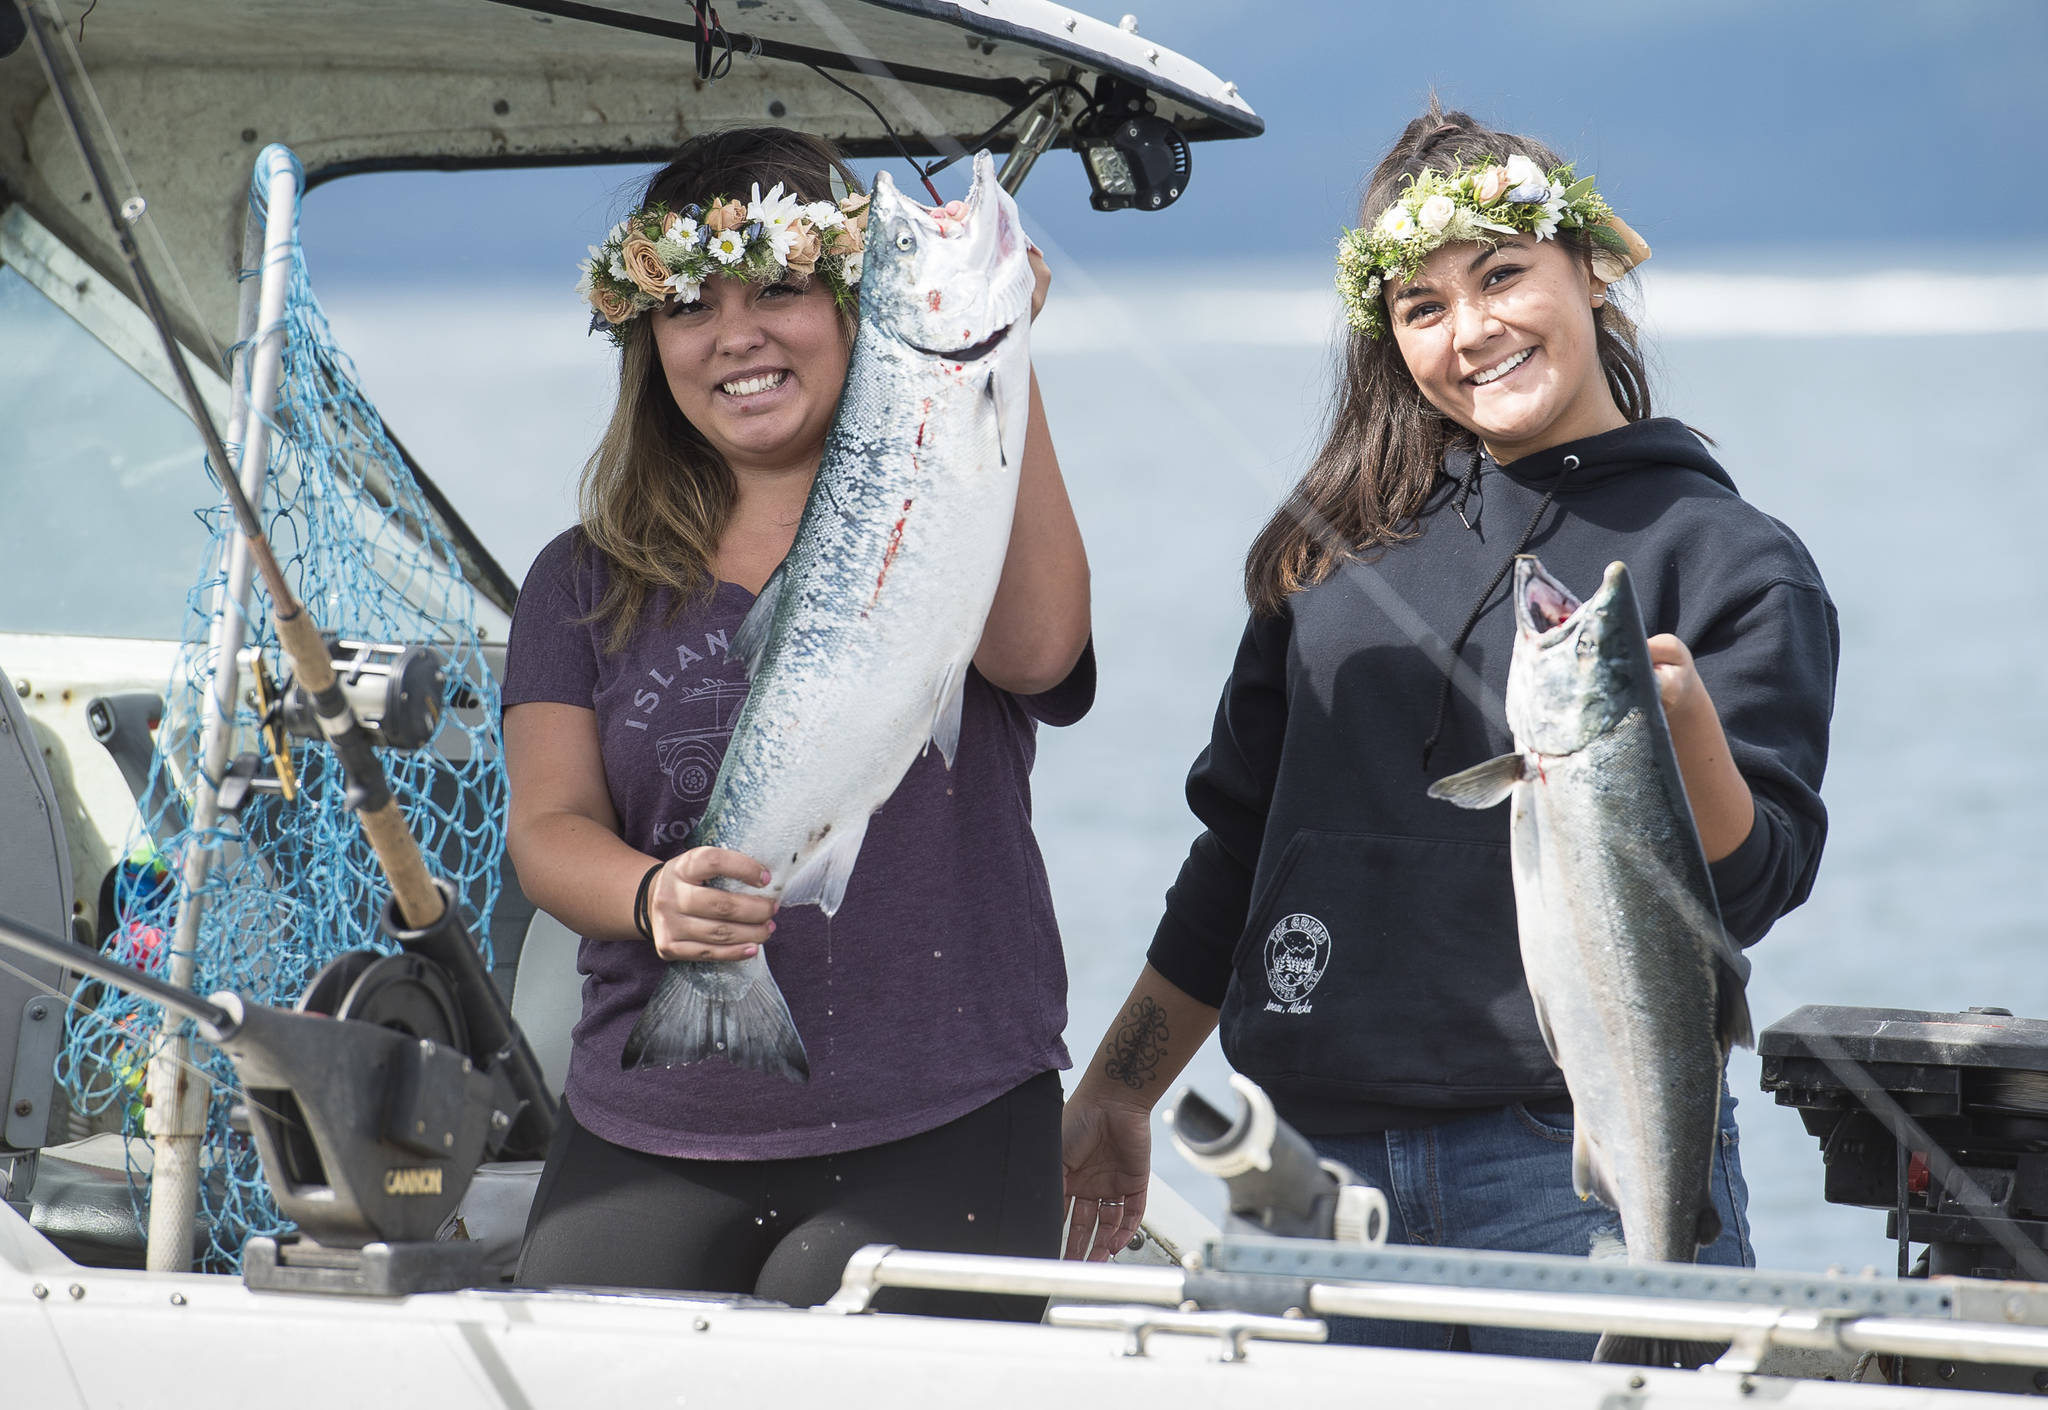 Tesla Cox, left, and Deanne Fuller on the Lil’ Mermaid show their silver salmon during the 72nd Annual Golden North Salmon Derby on Friday, August 17, 2018, sponsored by the Territorial Sportsmen. (Michael Penn | Juneau Empire)